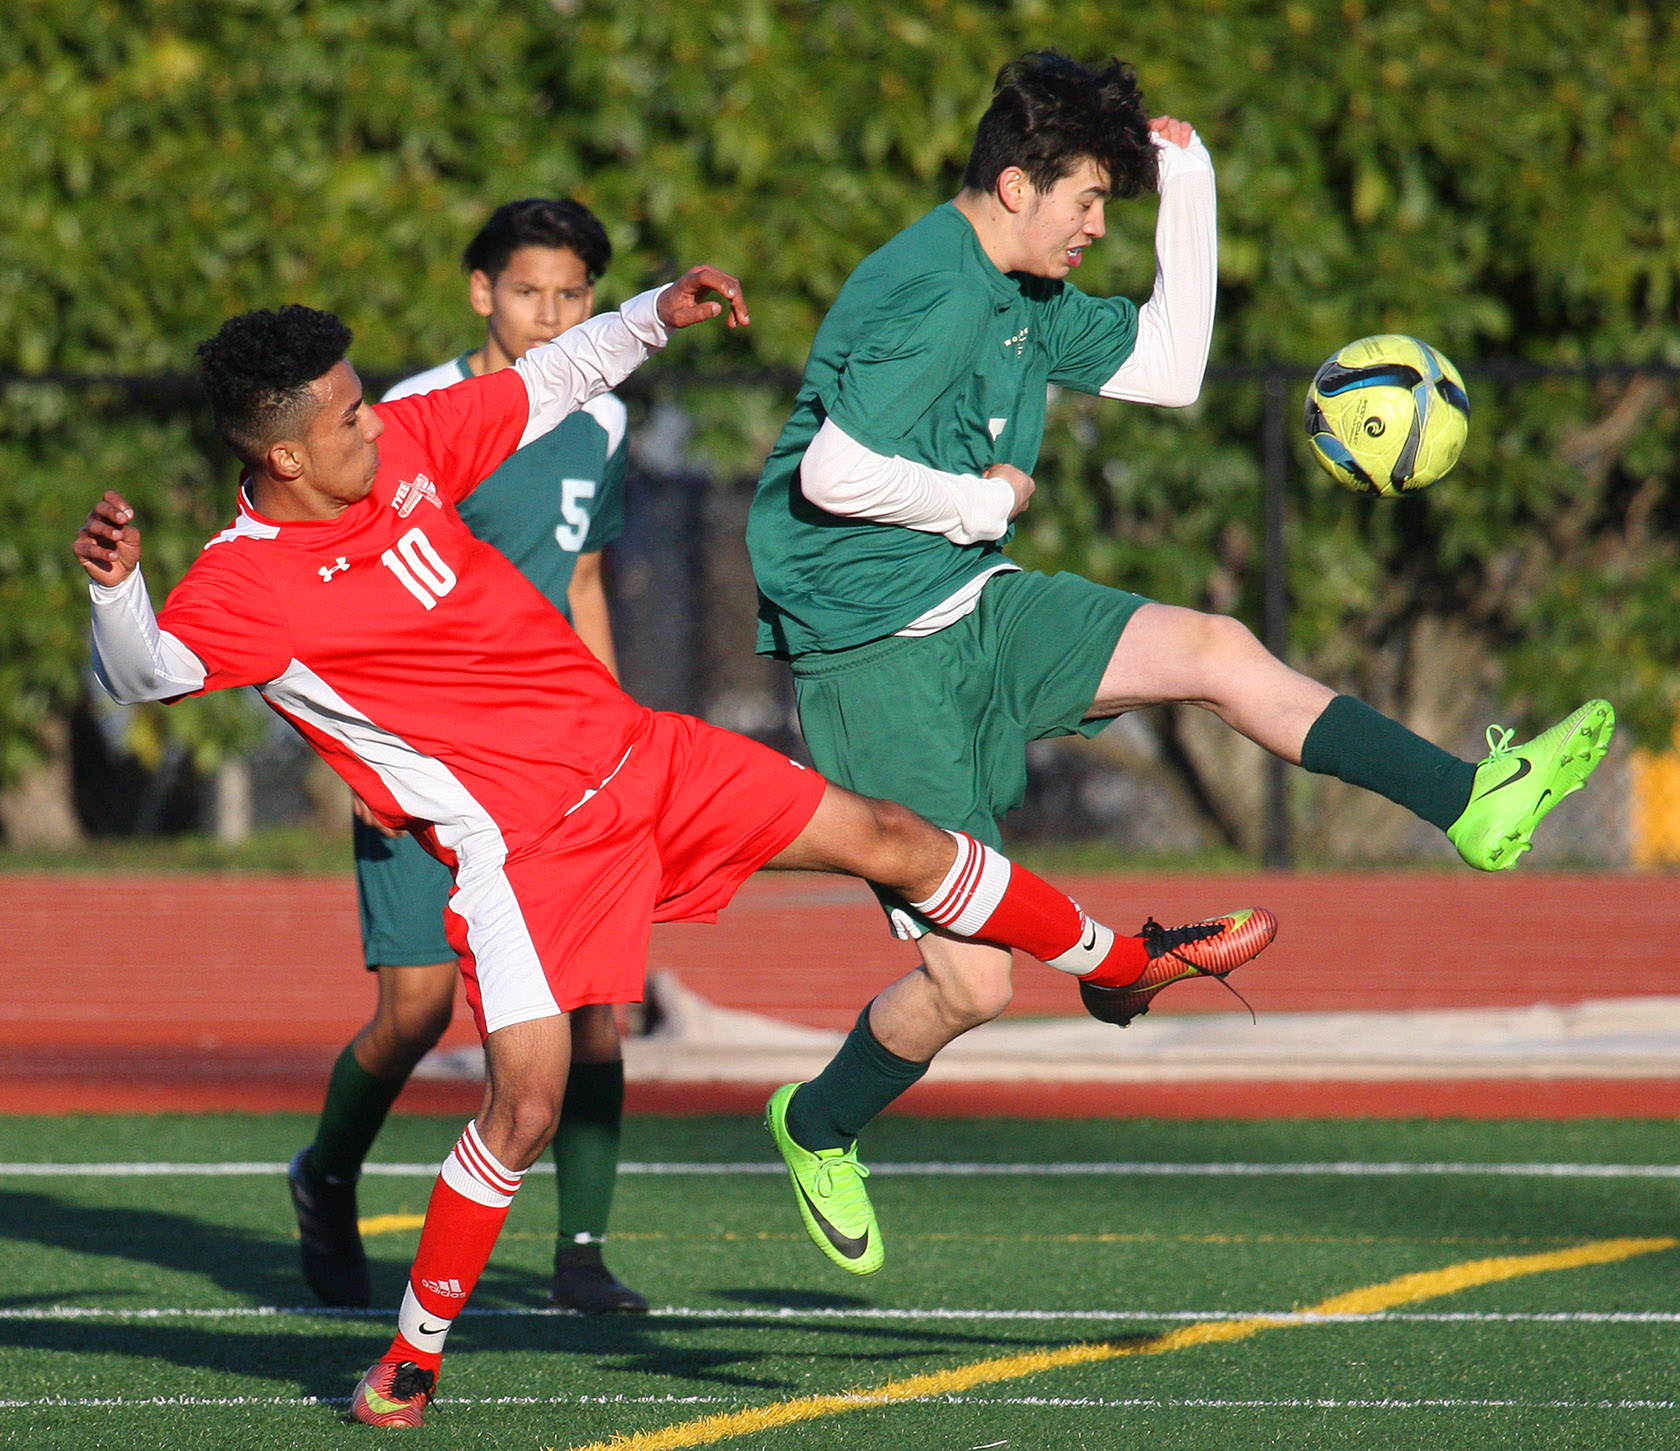 The ball gets away from Cesar Santamaria of Tyee and Evergreen's Josue Pedroza.